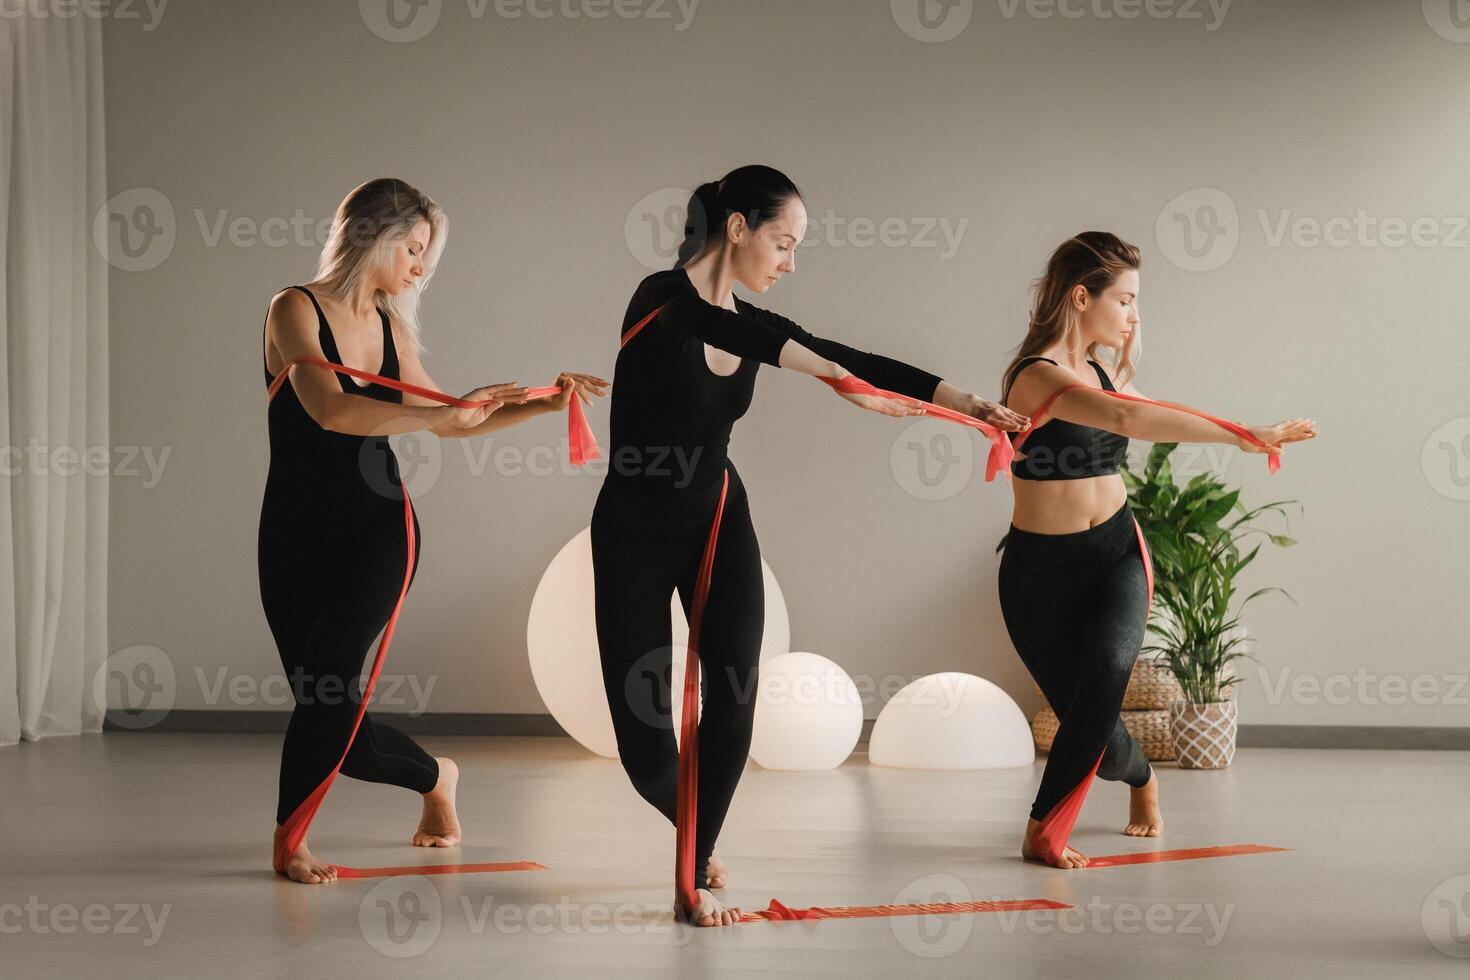 Girls in black are doing fitness with red ribbons indoors photo